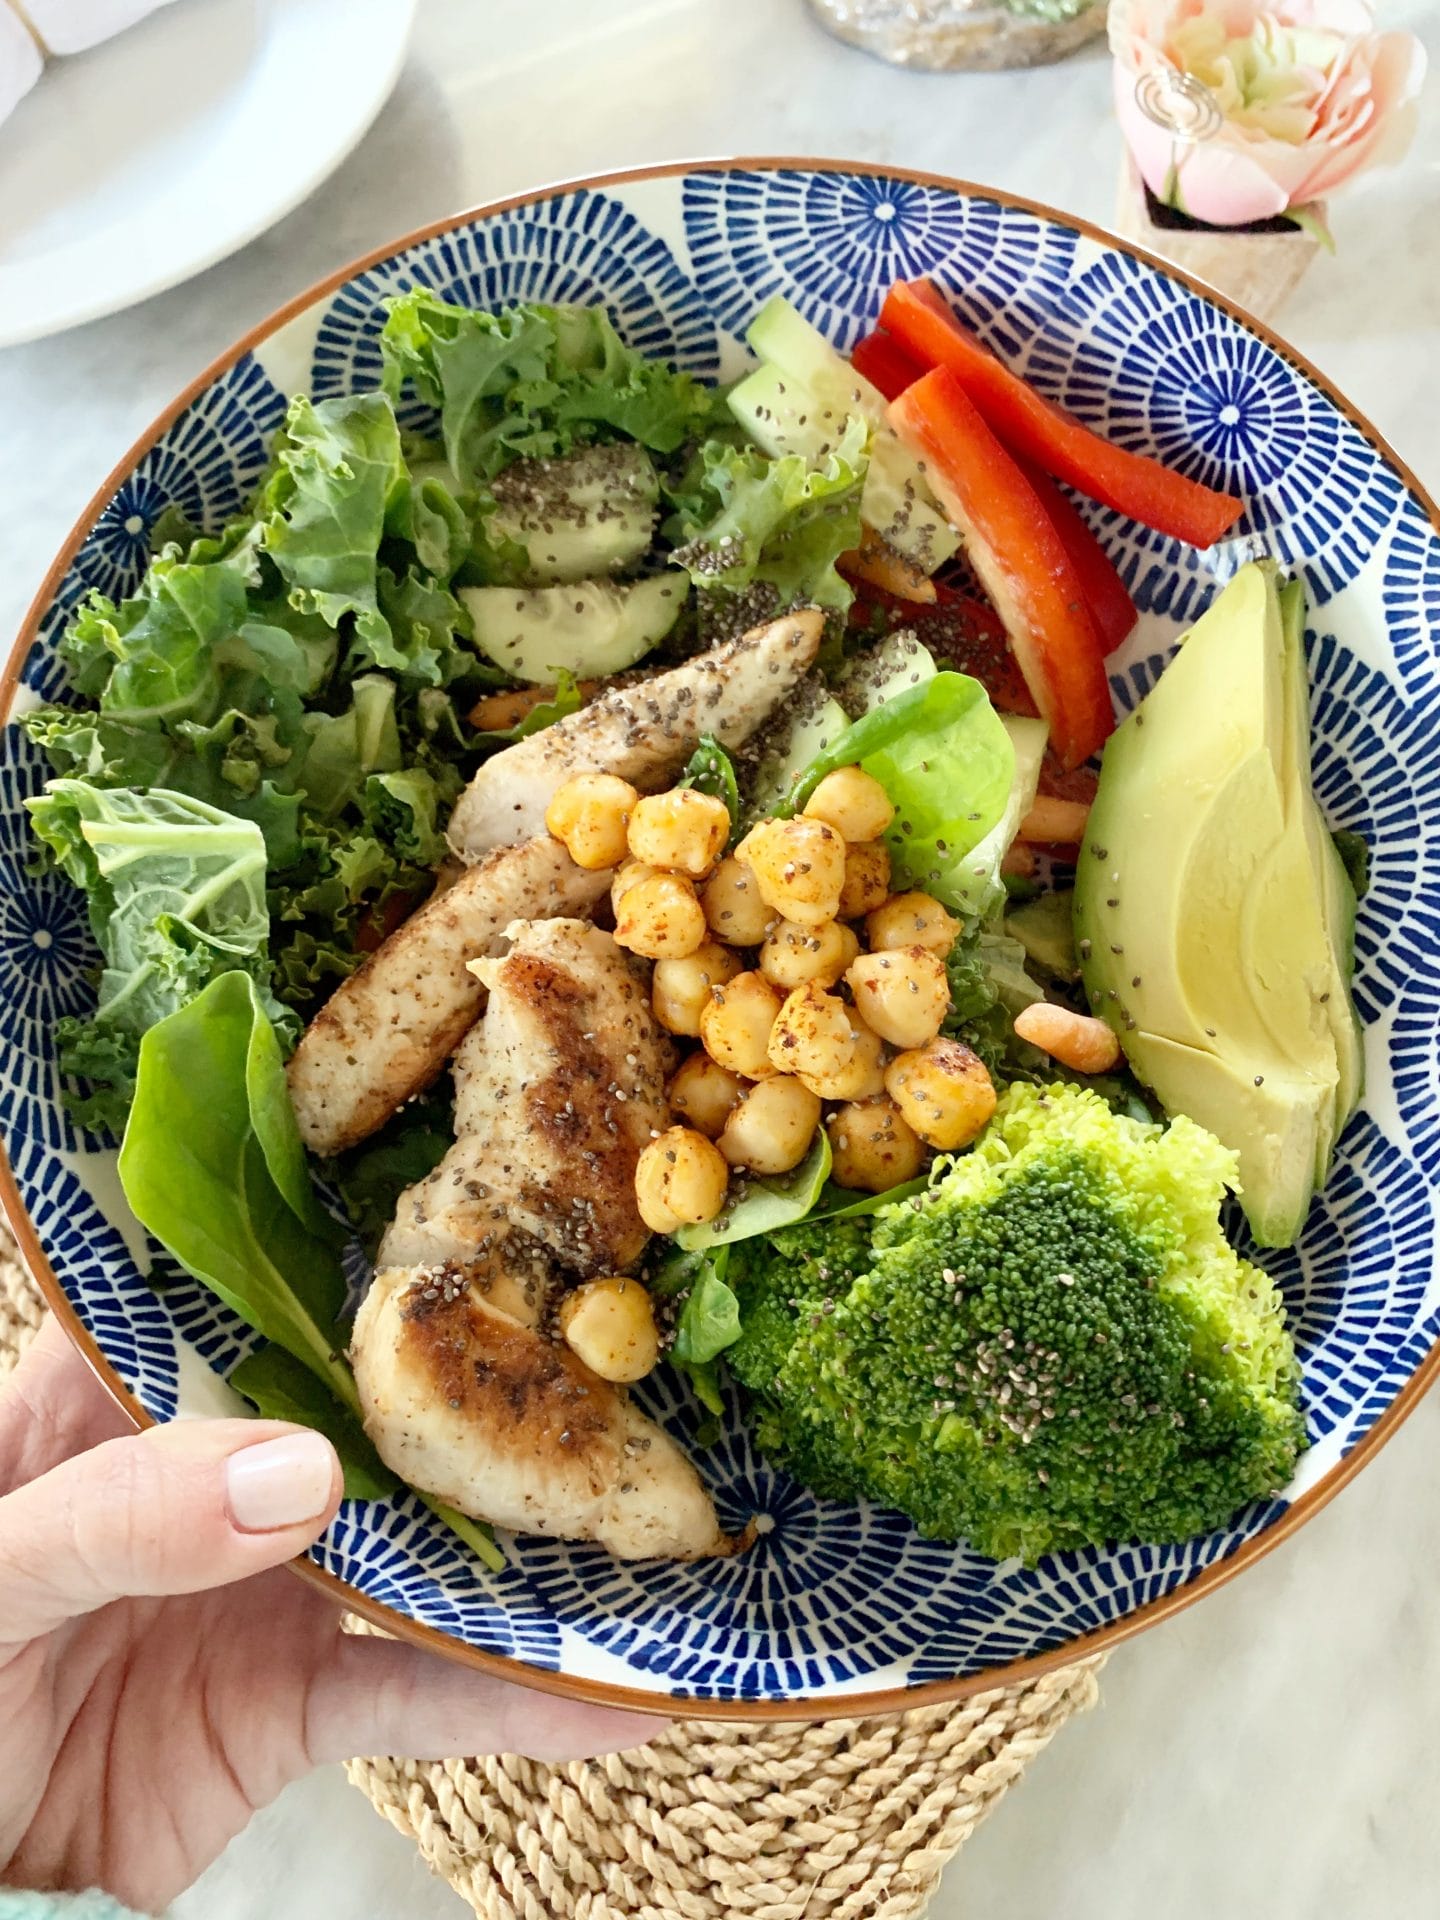 Chicken salad with spiced chickpeas